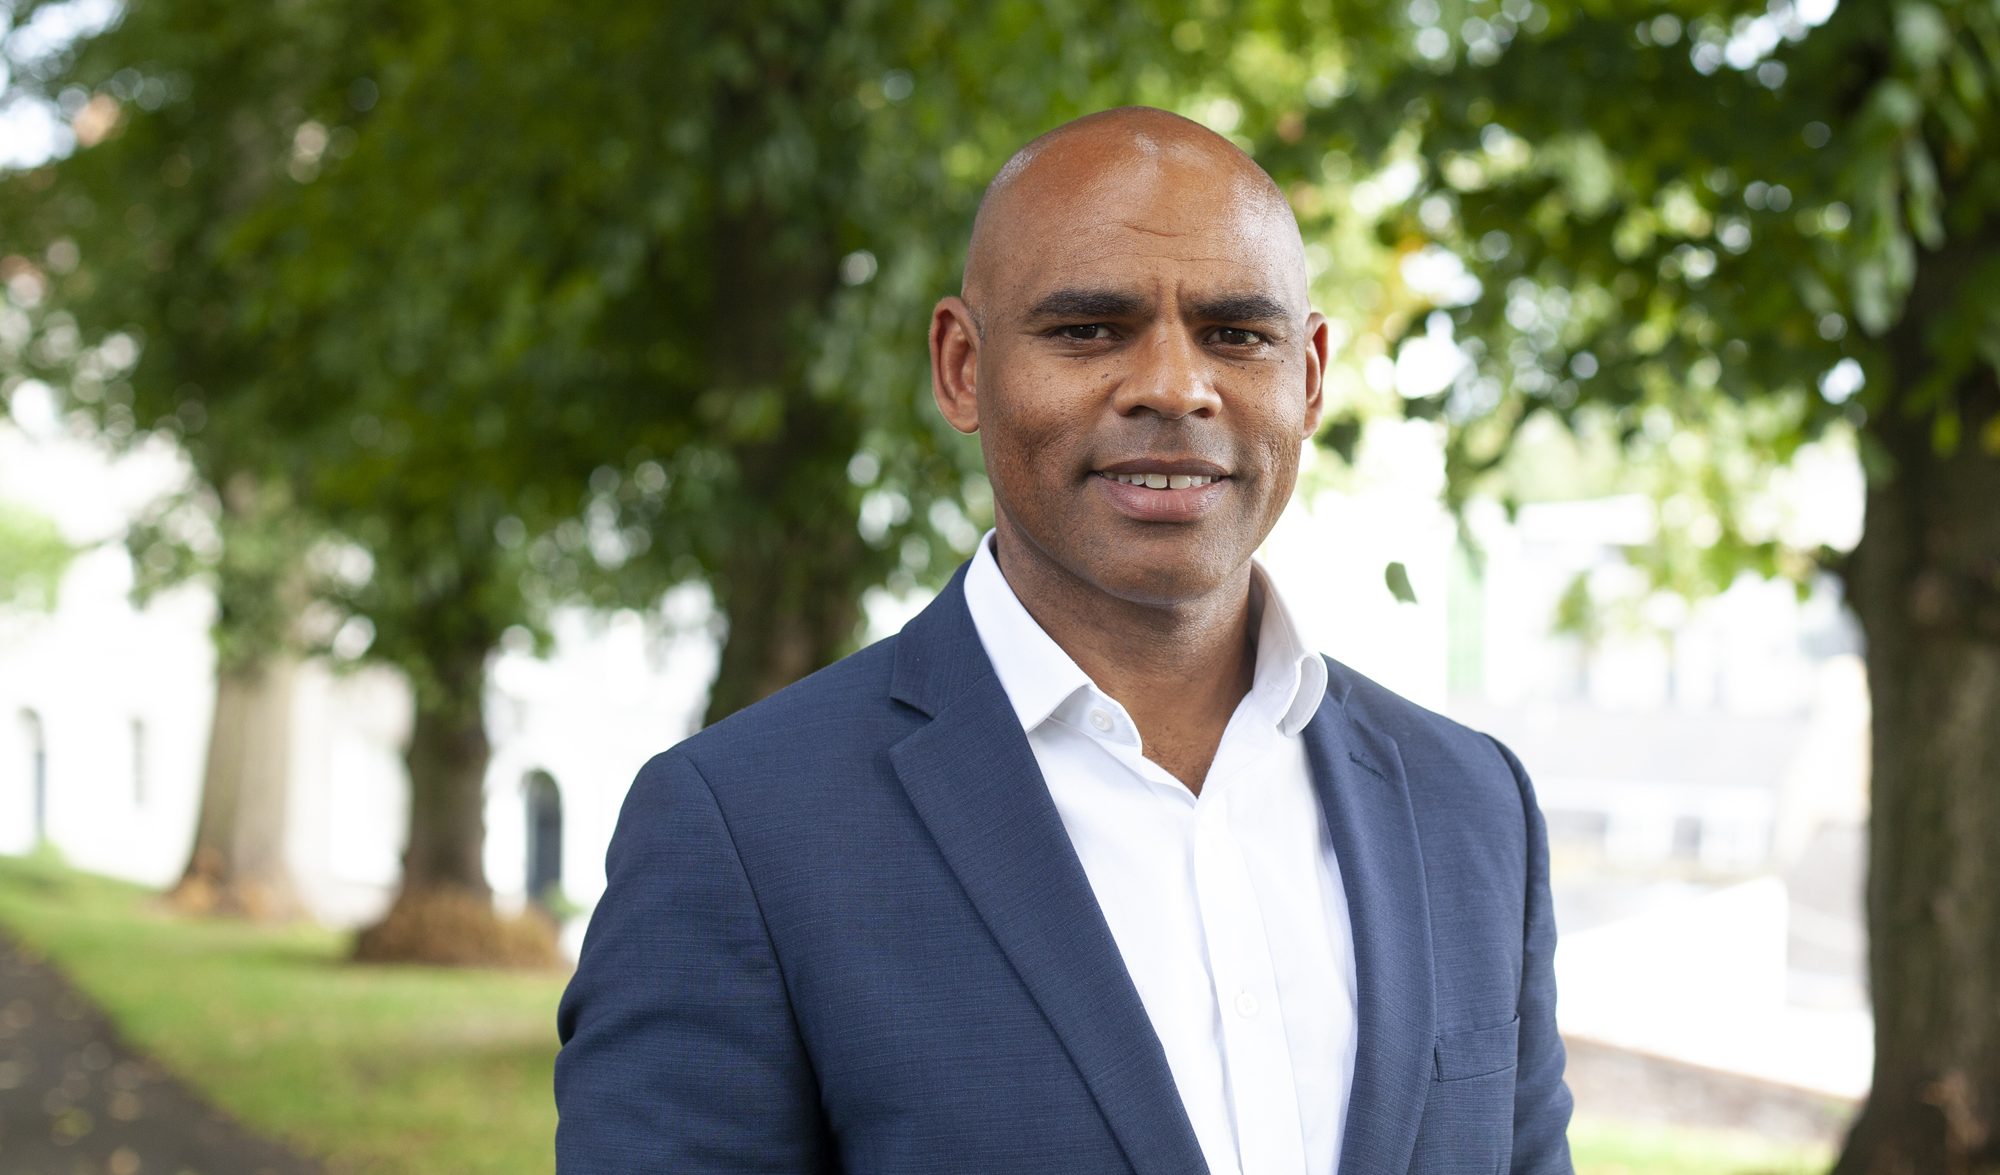 The Mayor of Bristol, Marvin Rees